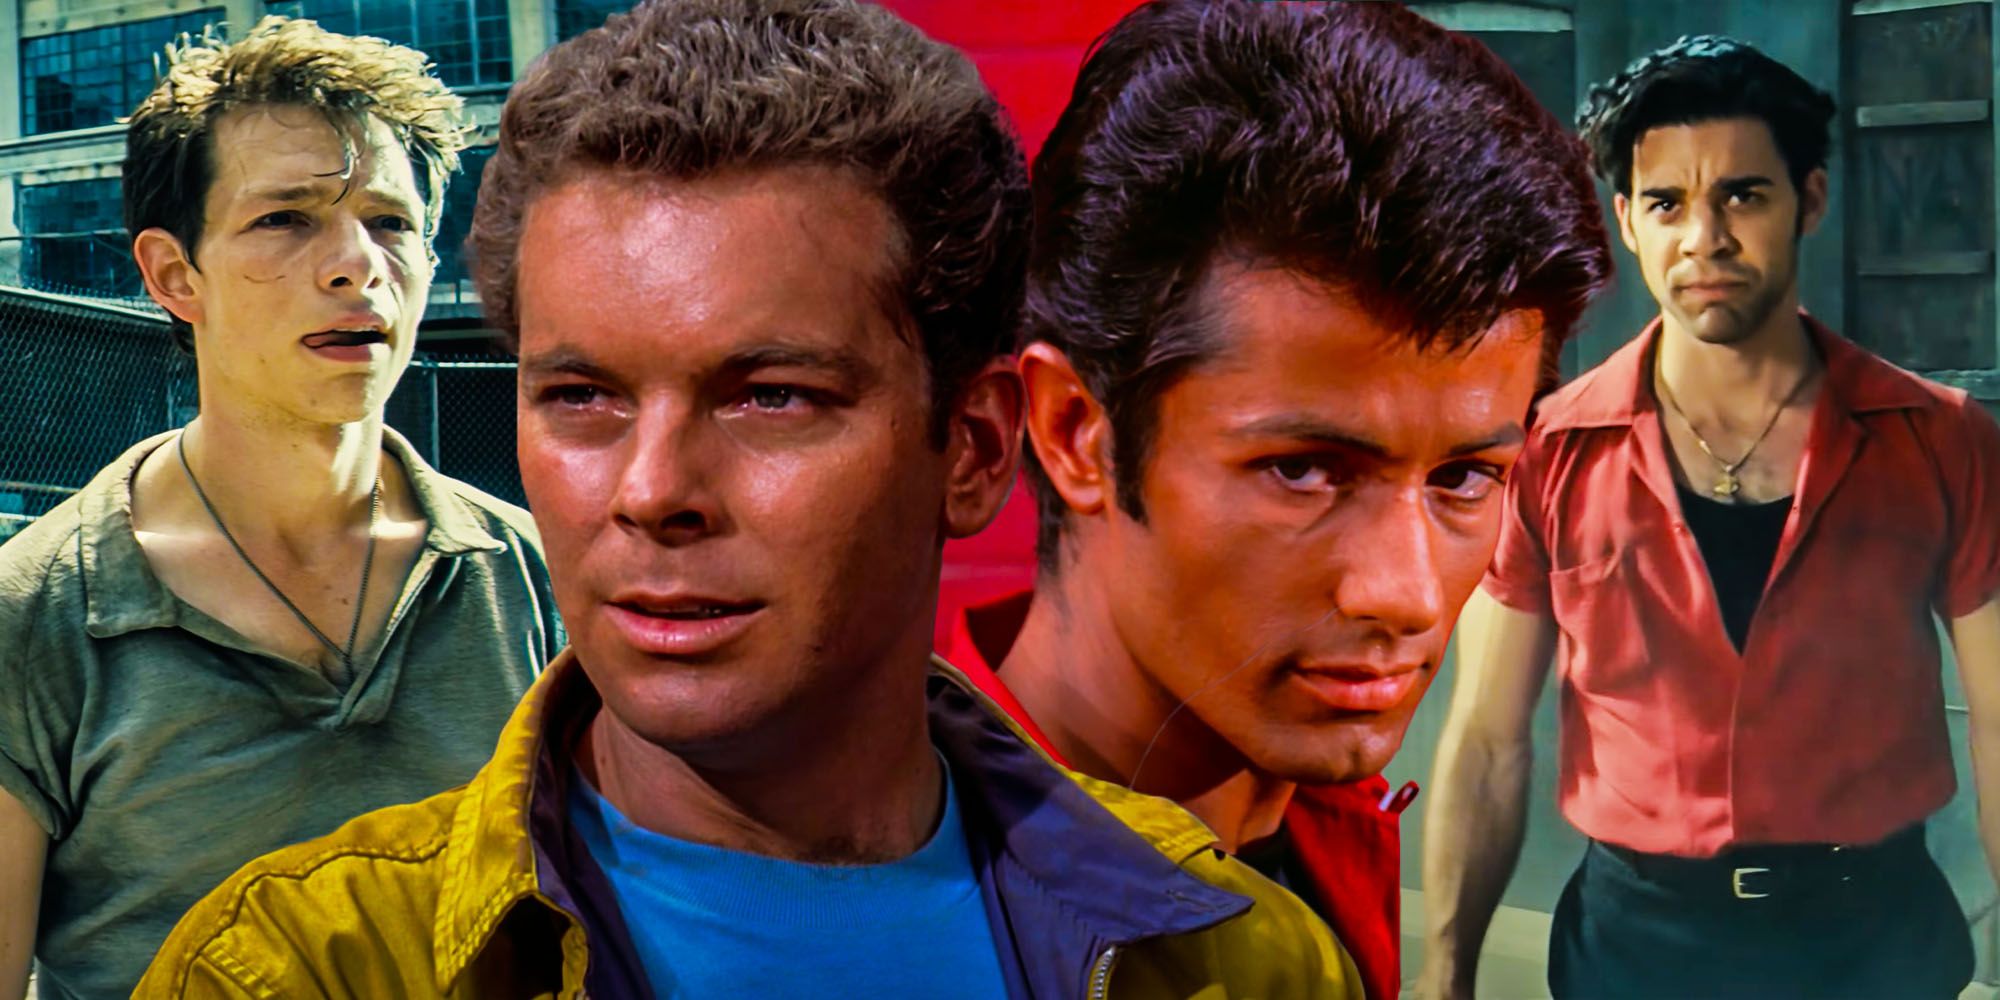 West side story 2021 and 1961 cast comparison